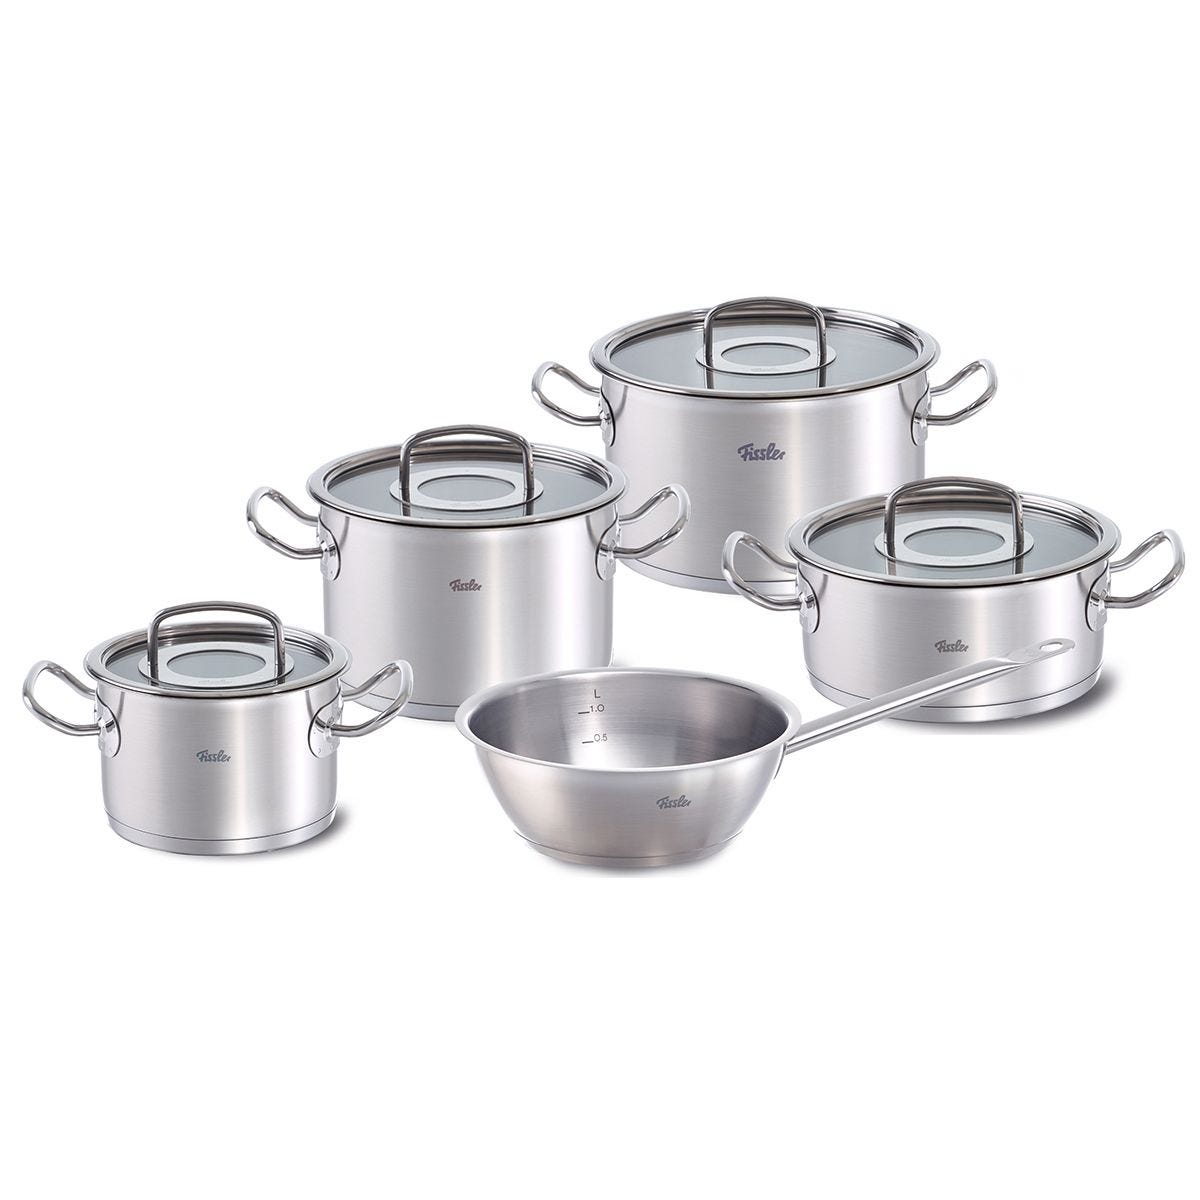 Original-Profi Collection® 2019 Stainless Steel Set with Glass Lids, 9 Piece with Concial Pan